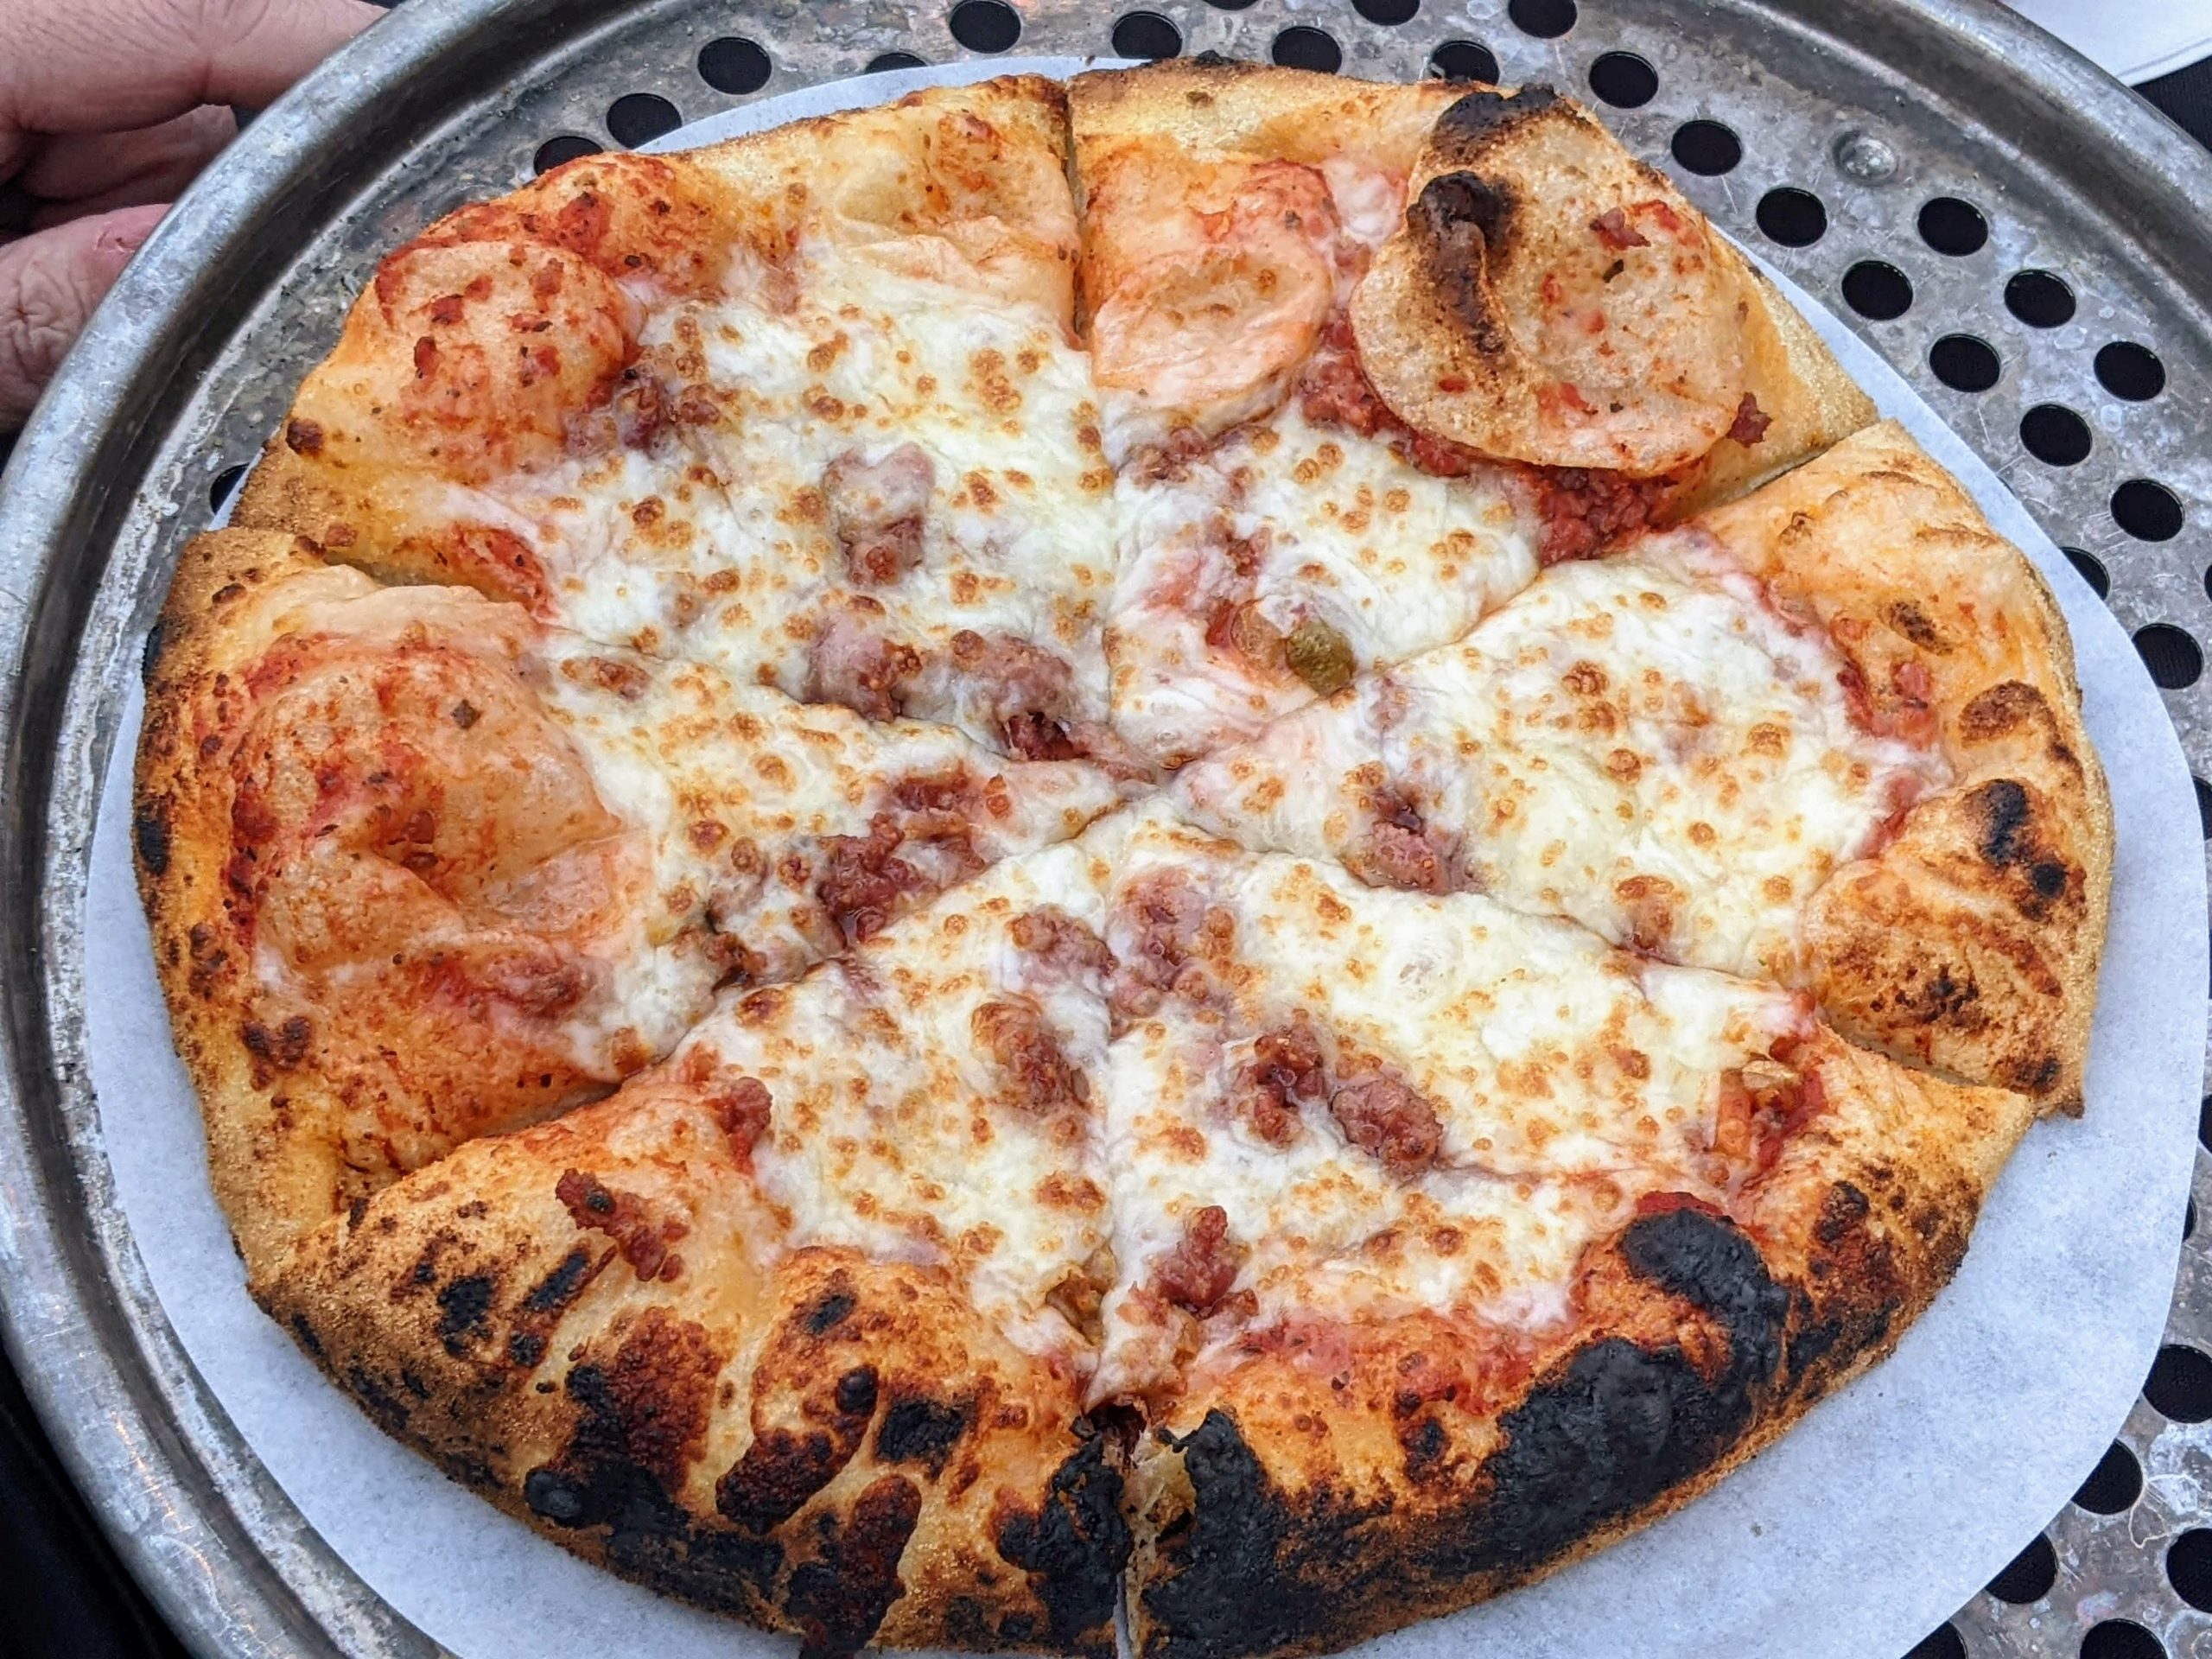 Meat pizza by Crafted Food Services at the Plant Life Pizza Picnic outside of Des Moines